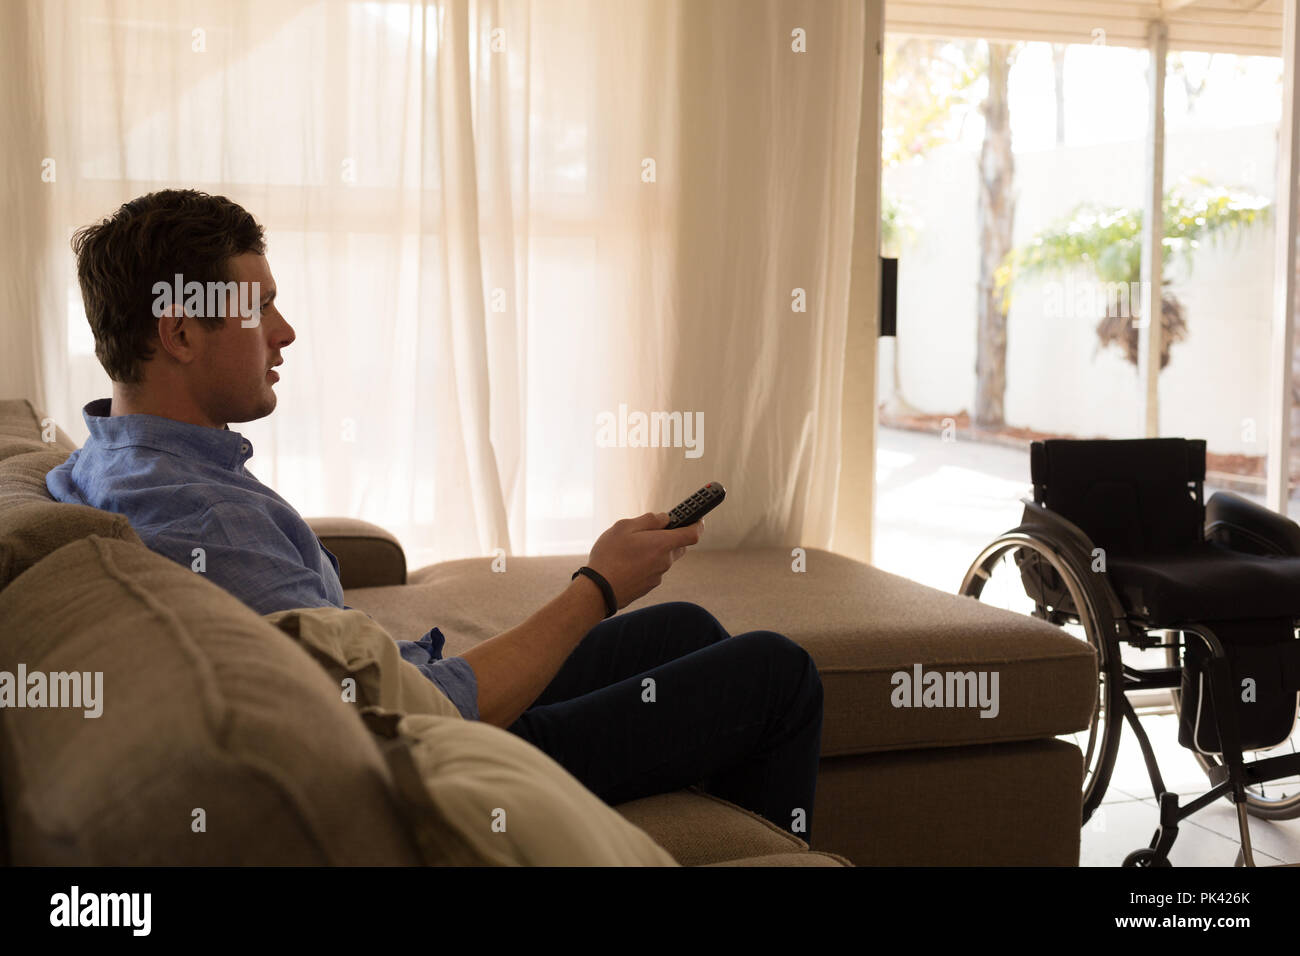 Disabled man changing channels in living room Stock Photo